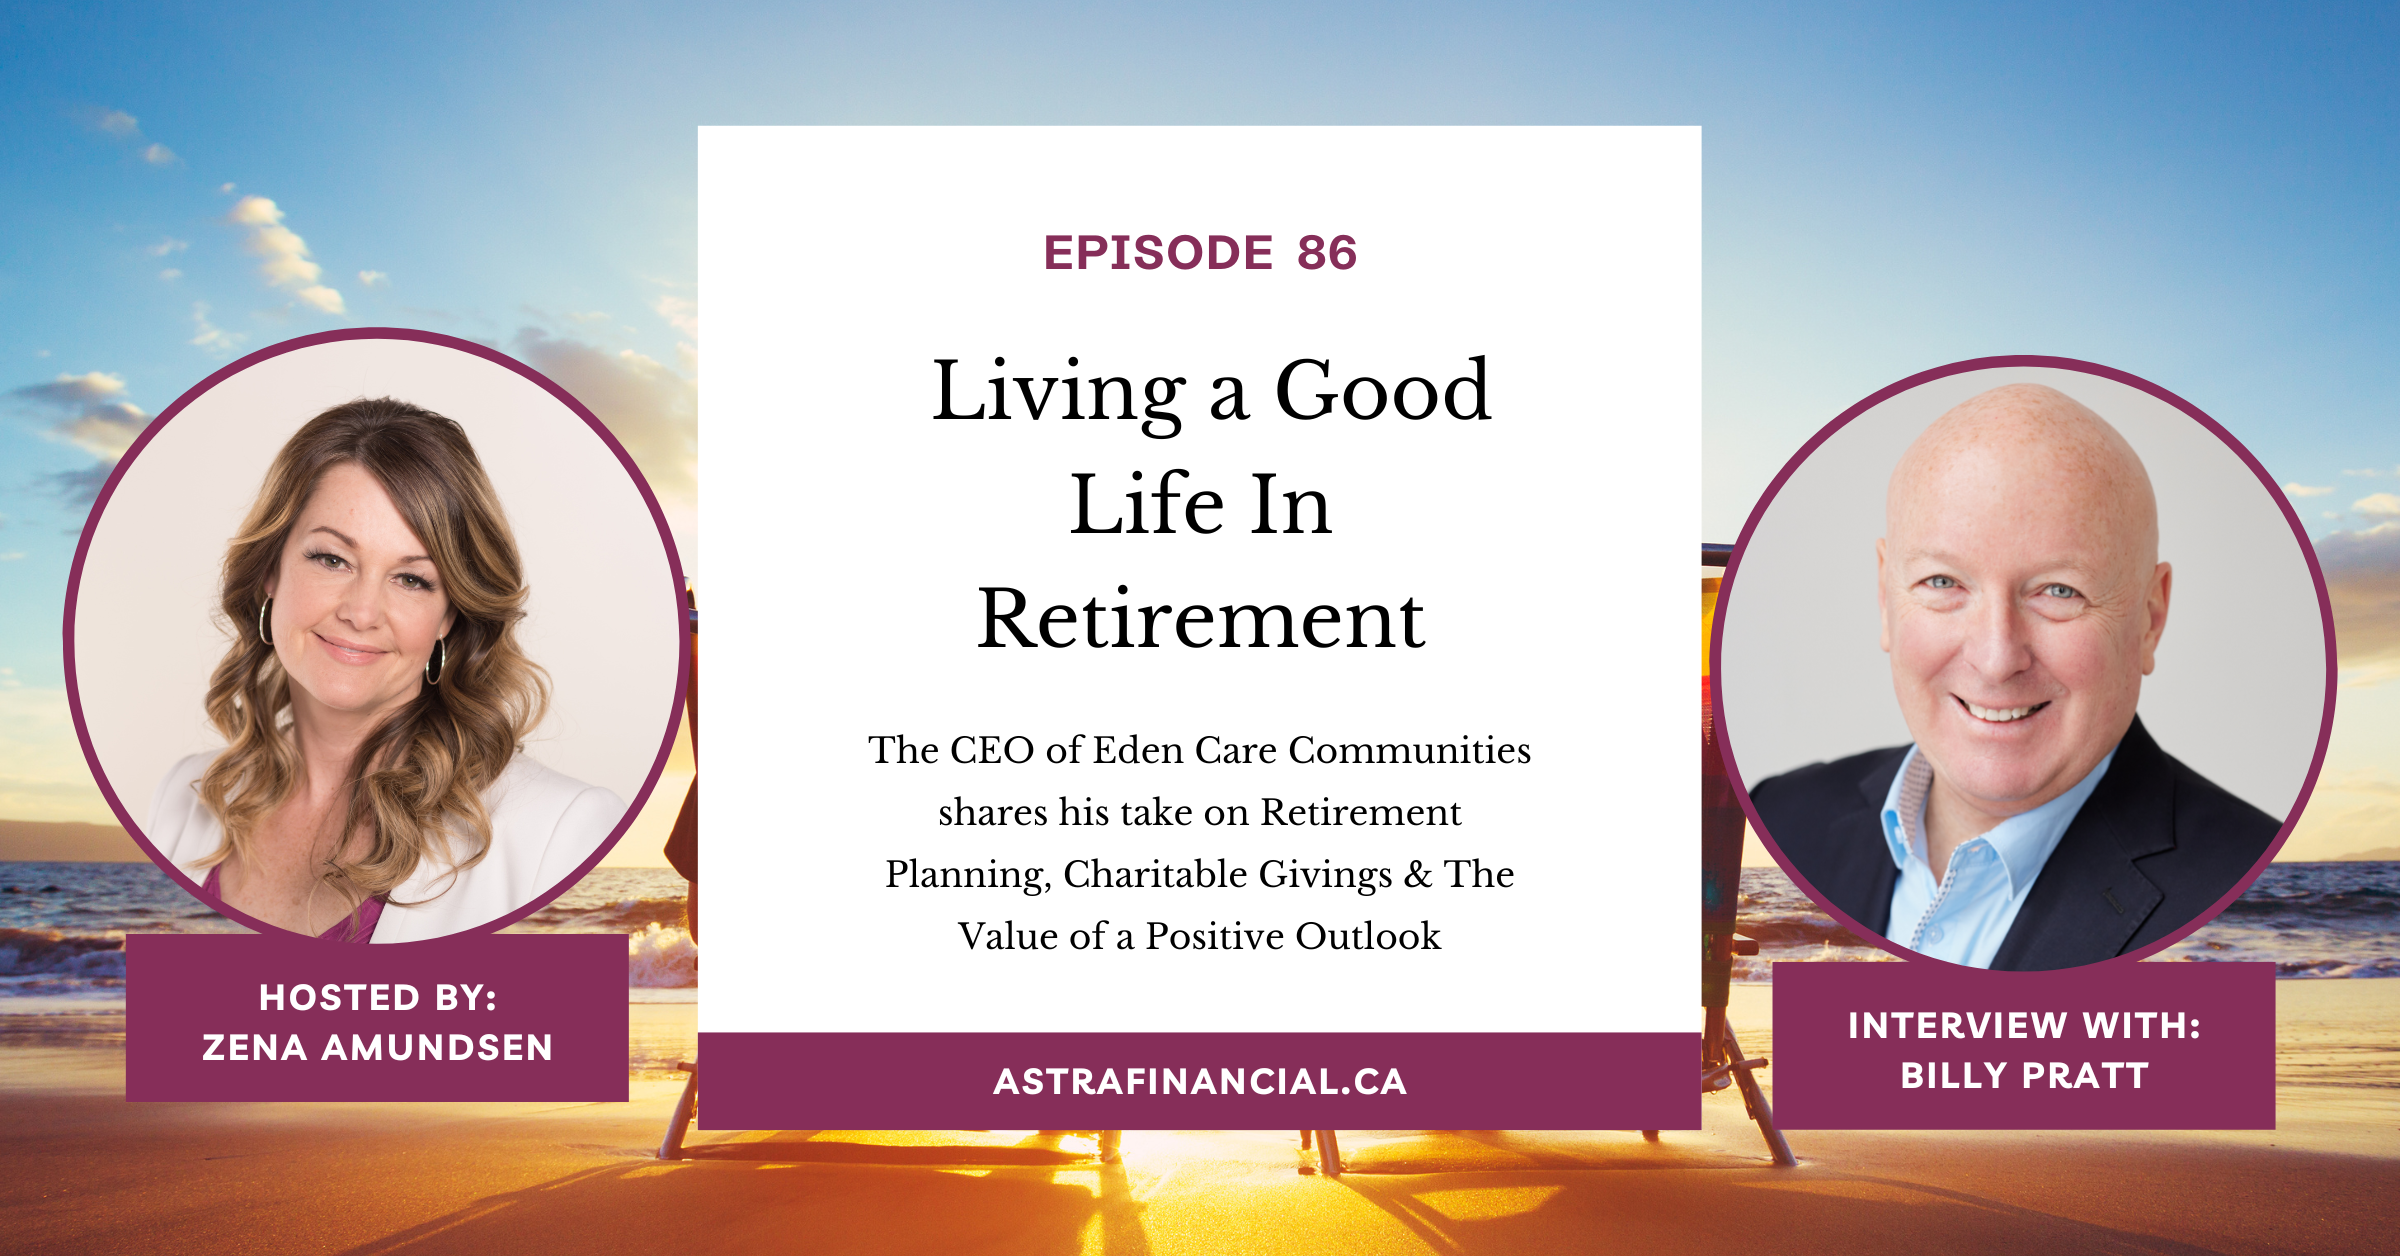 Living a Good Life (Interview with Billy Pratt) by Astra Financial